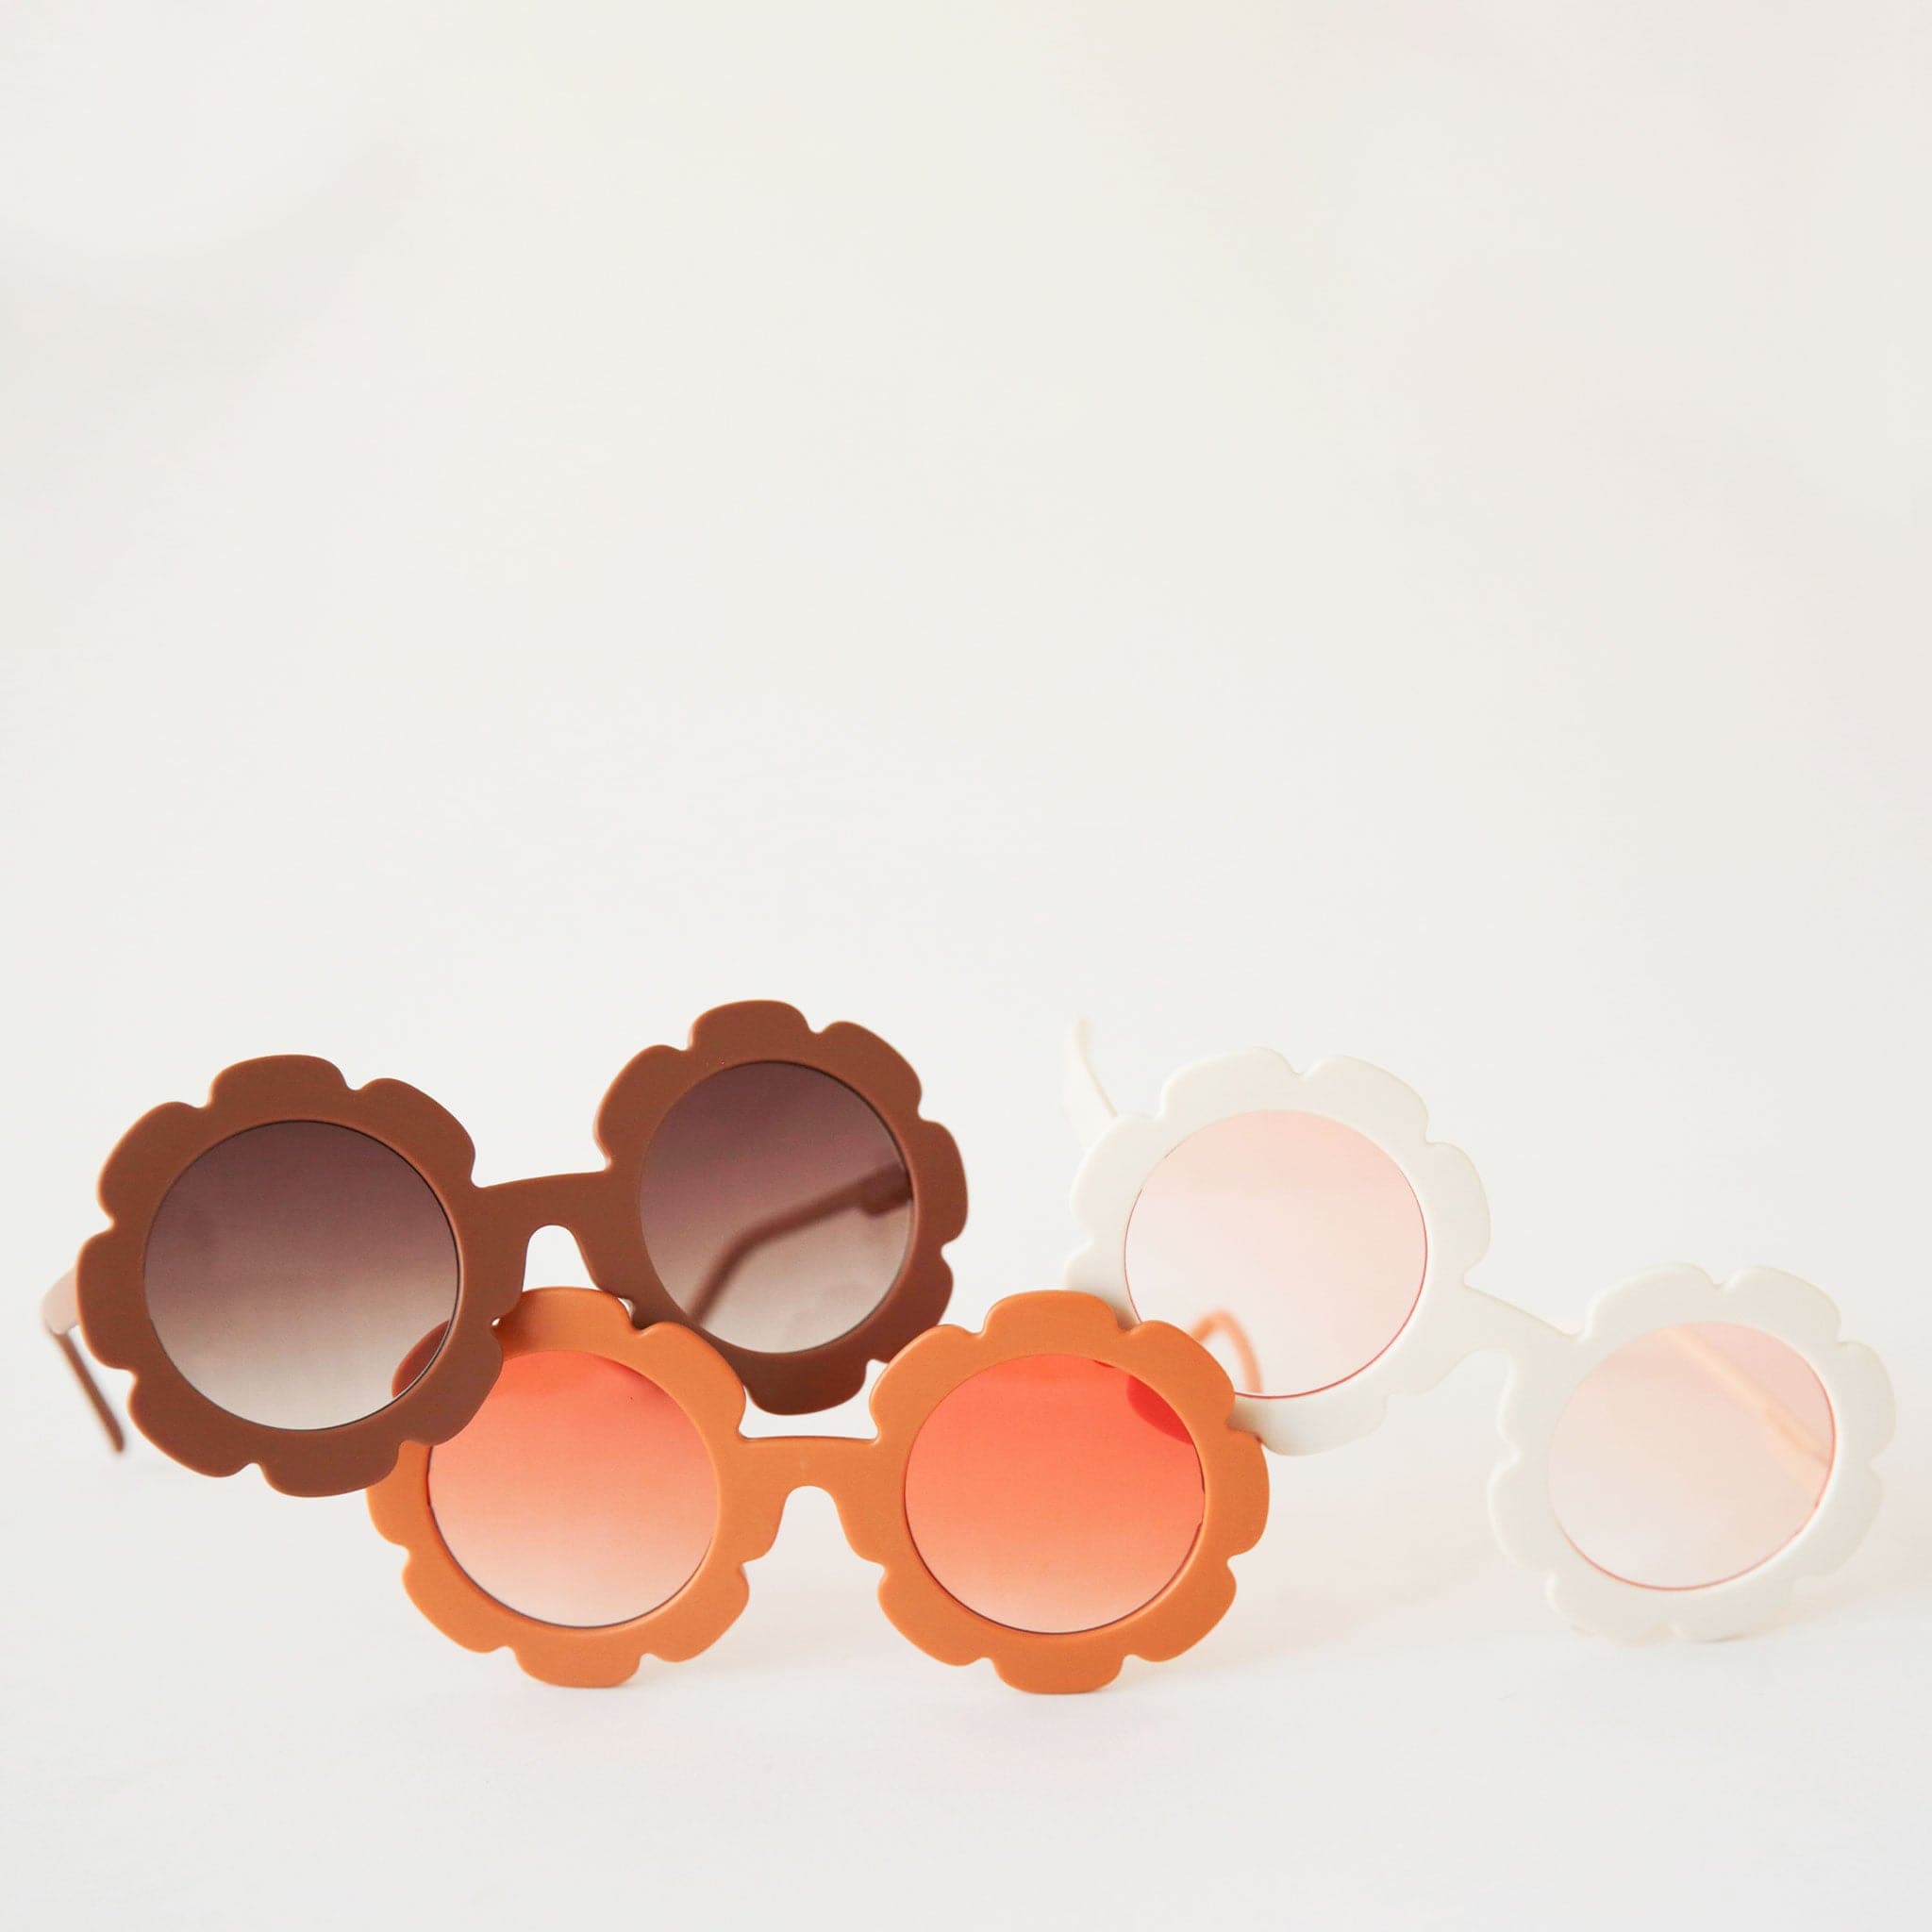 An orange flower shaped sunglass with a round orange lens in the center photographed here with the other color ways available, one a brown and the other a white frame with a pinkish lens.